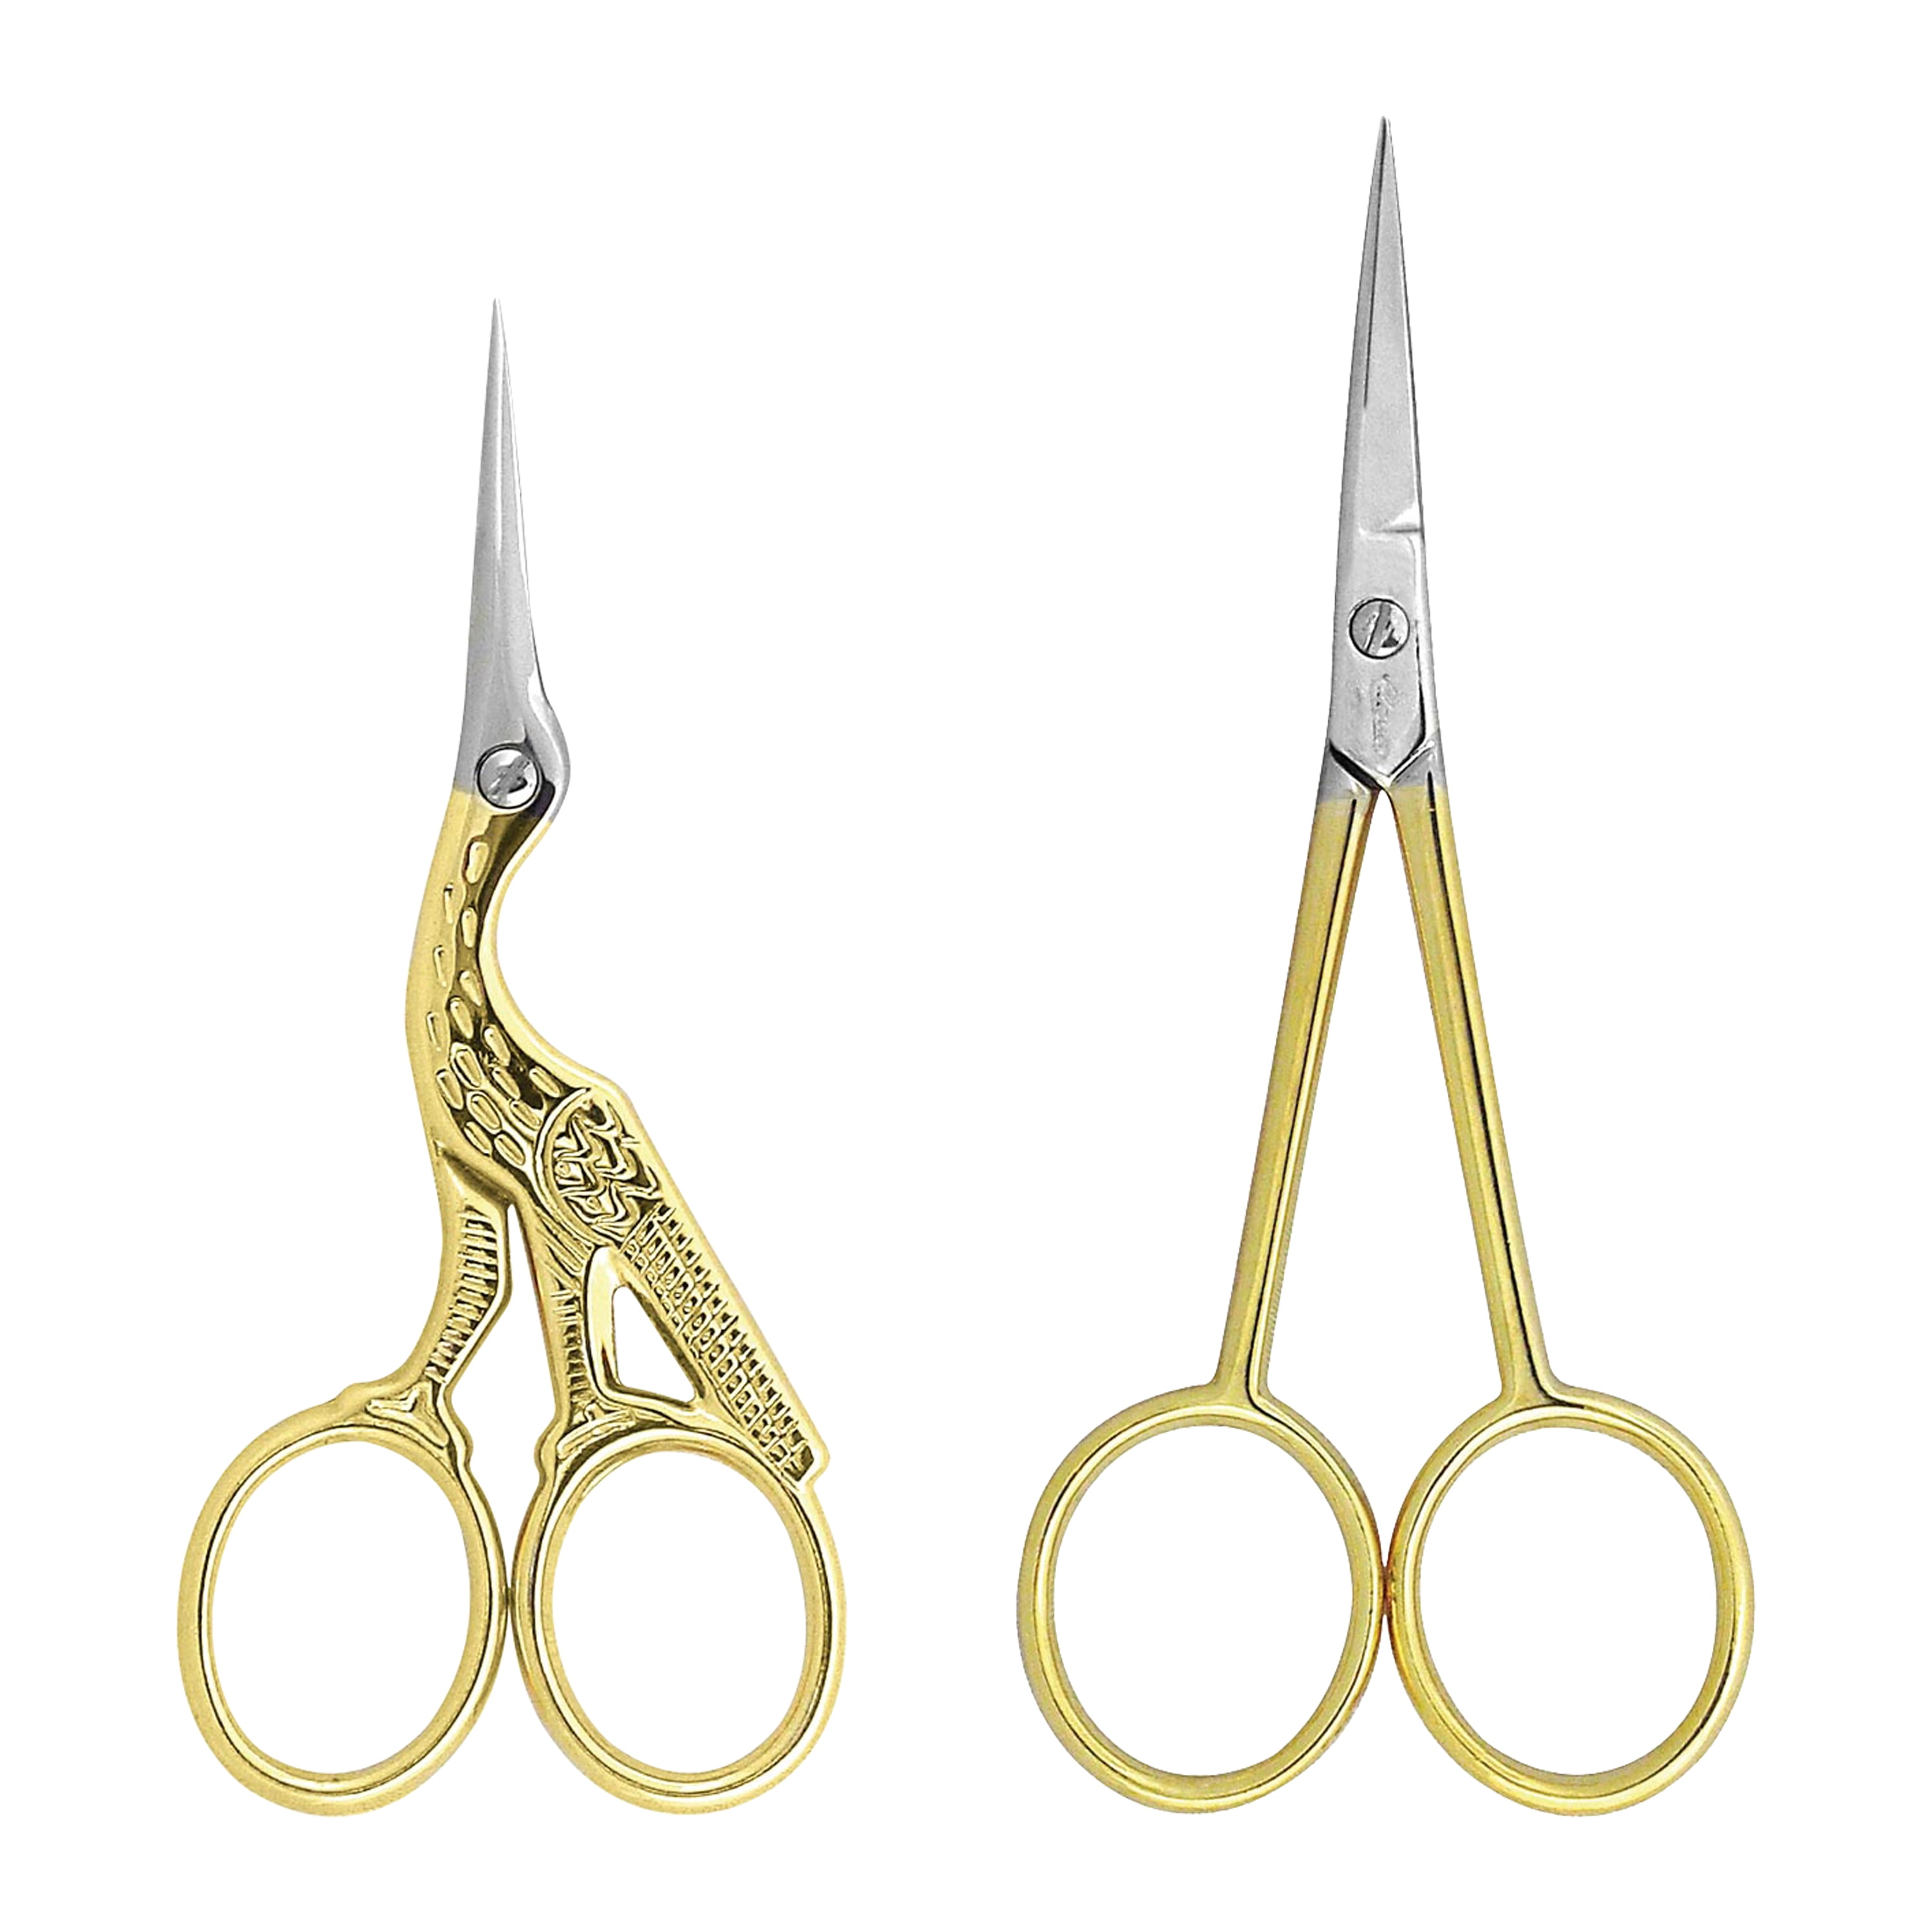 Embroidery Sewing Scissors, One Hook Blade, Stainless Steel 4.5 Seam –  A2ZSCILAB